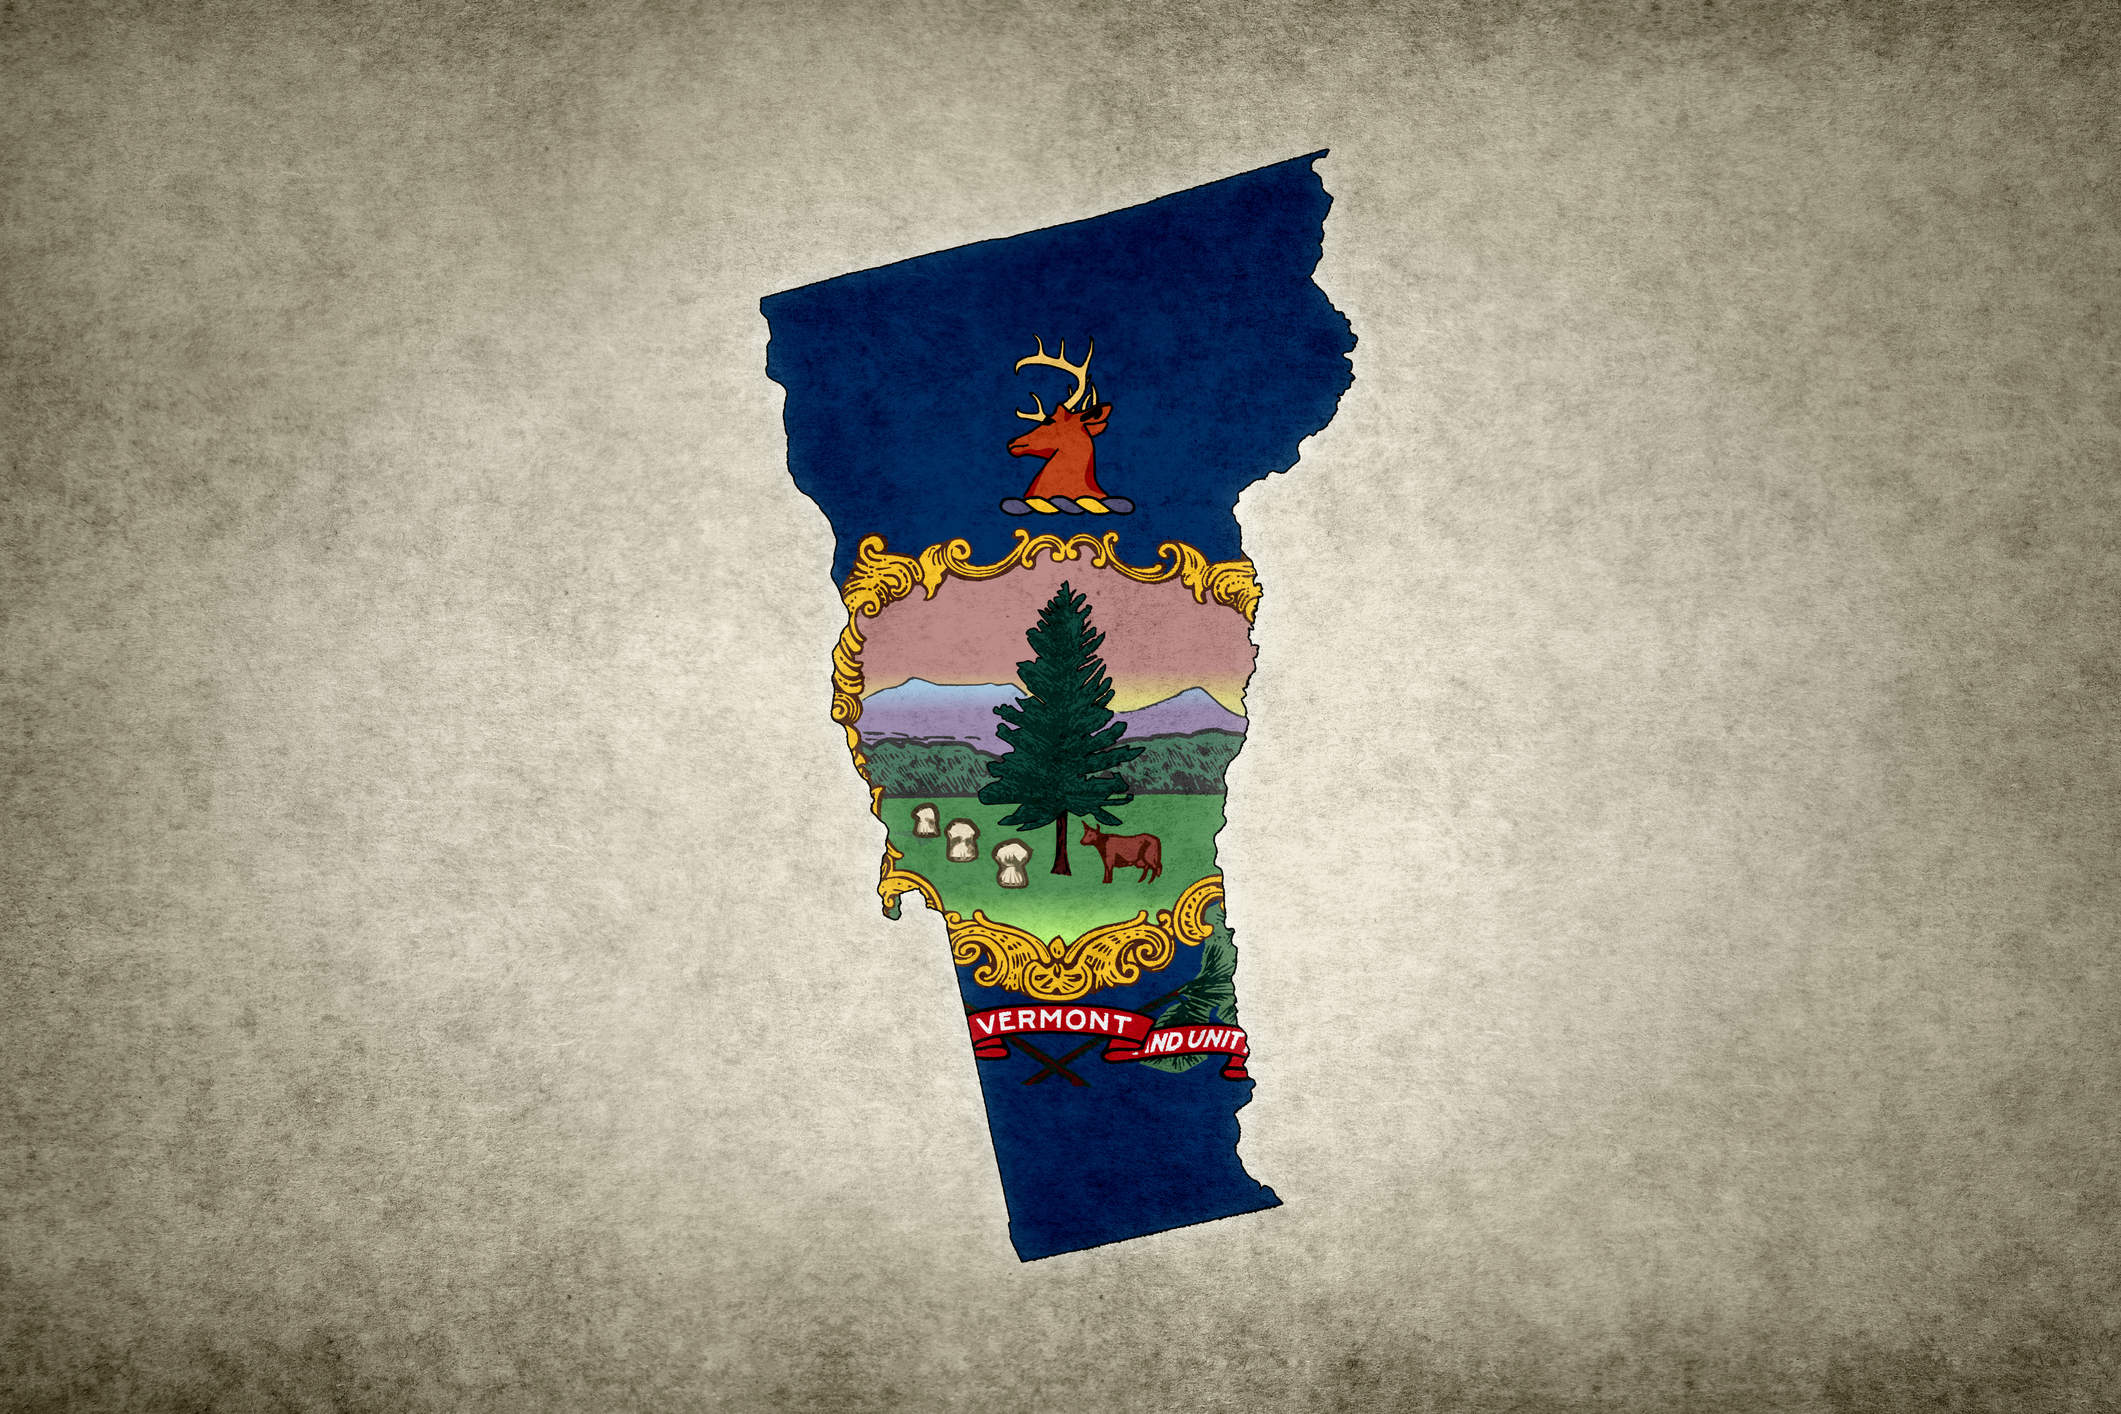 Grunge map of the state of Vermont (USA) with its flag printed within its border